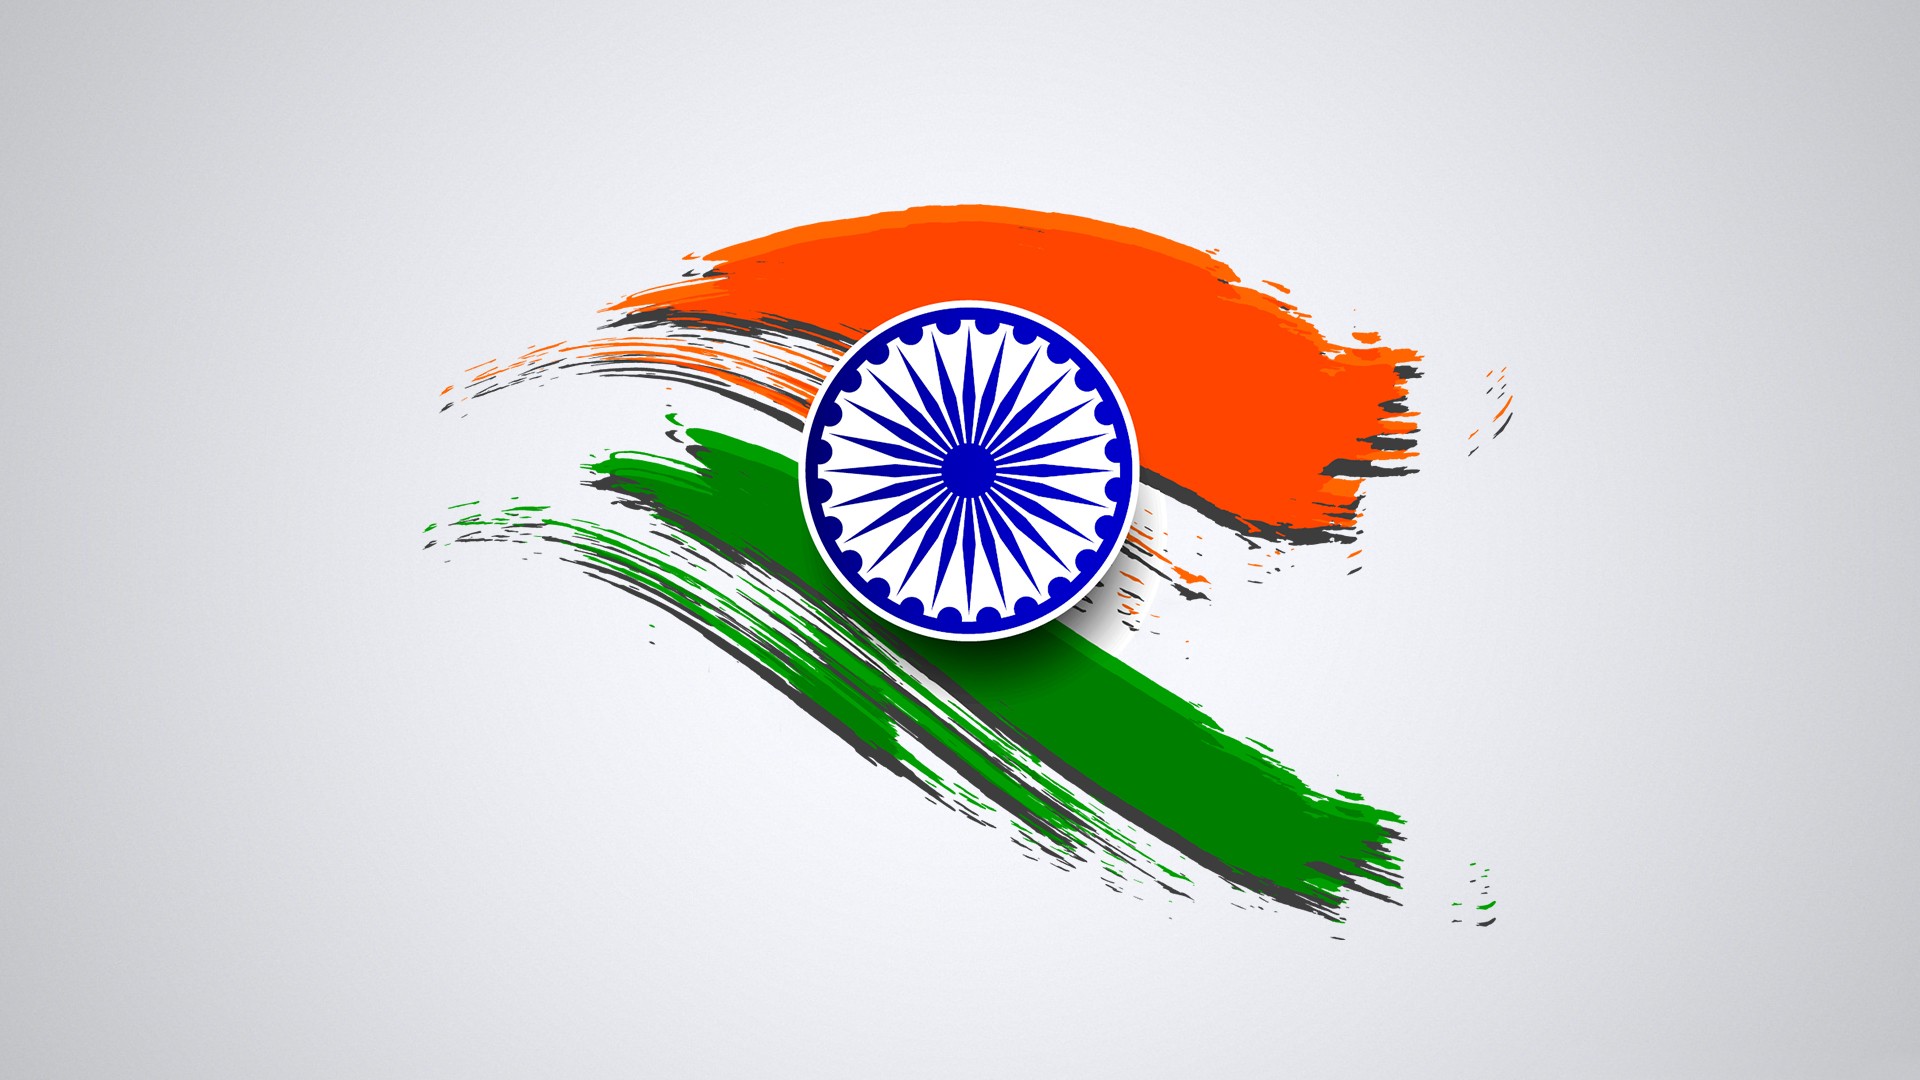 India Flag Wallpaper Hd - Independence Day Images Hd - 1920x1080 Wallpaper  